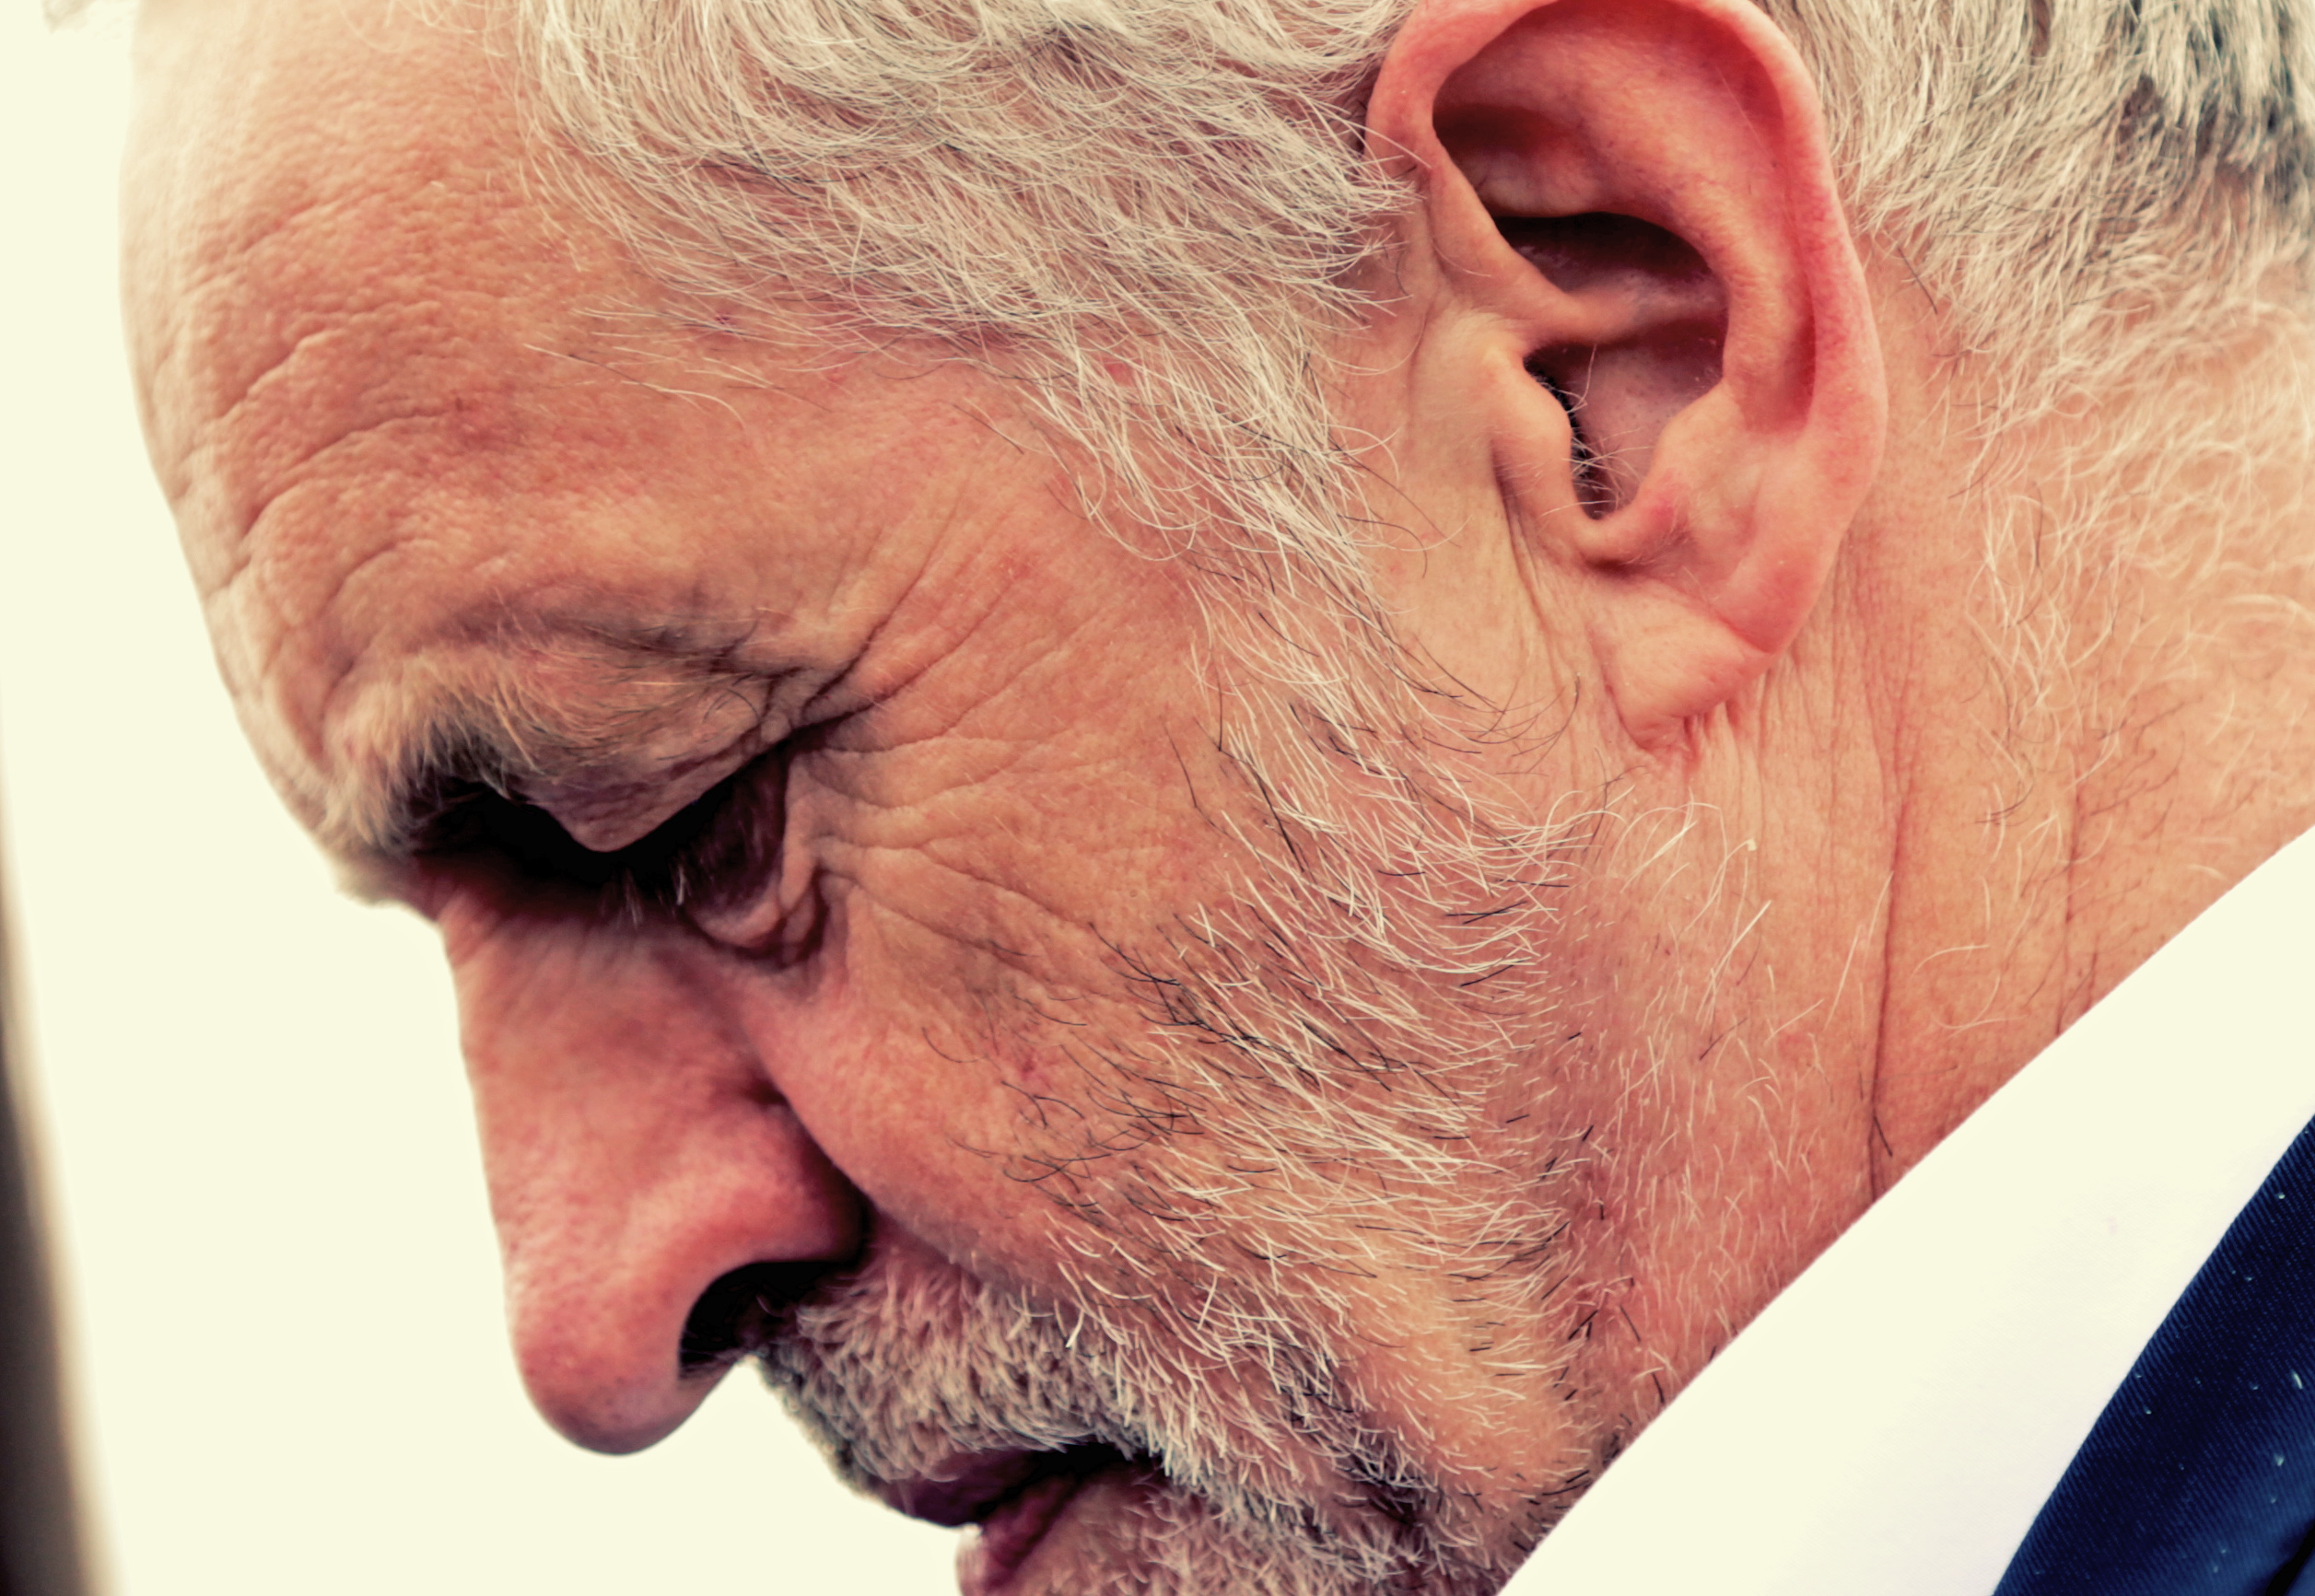 Labour Party leader, Jeremy Corbyn. Photo credit: flickr Andy Miah http://tinyurl.com/klgohwt Creative Commons license: https://creativecommons.org/licenses/by-nc/2.0/